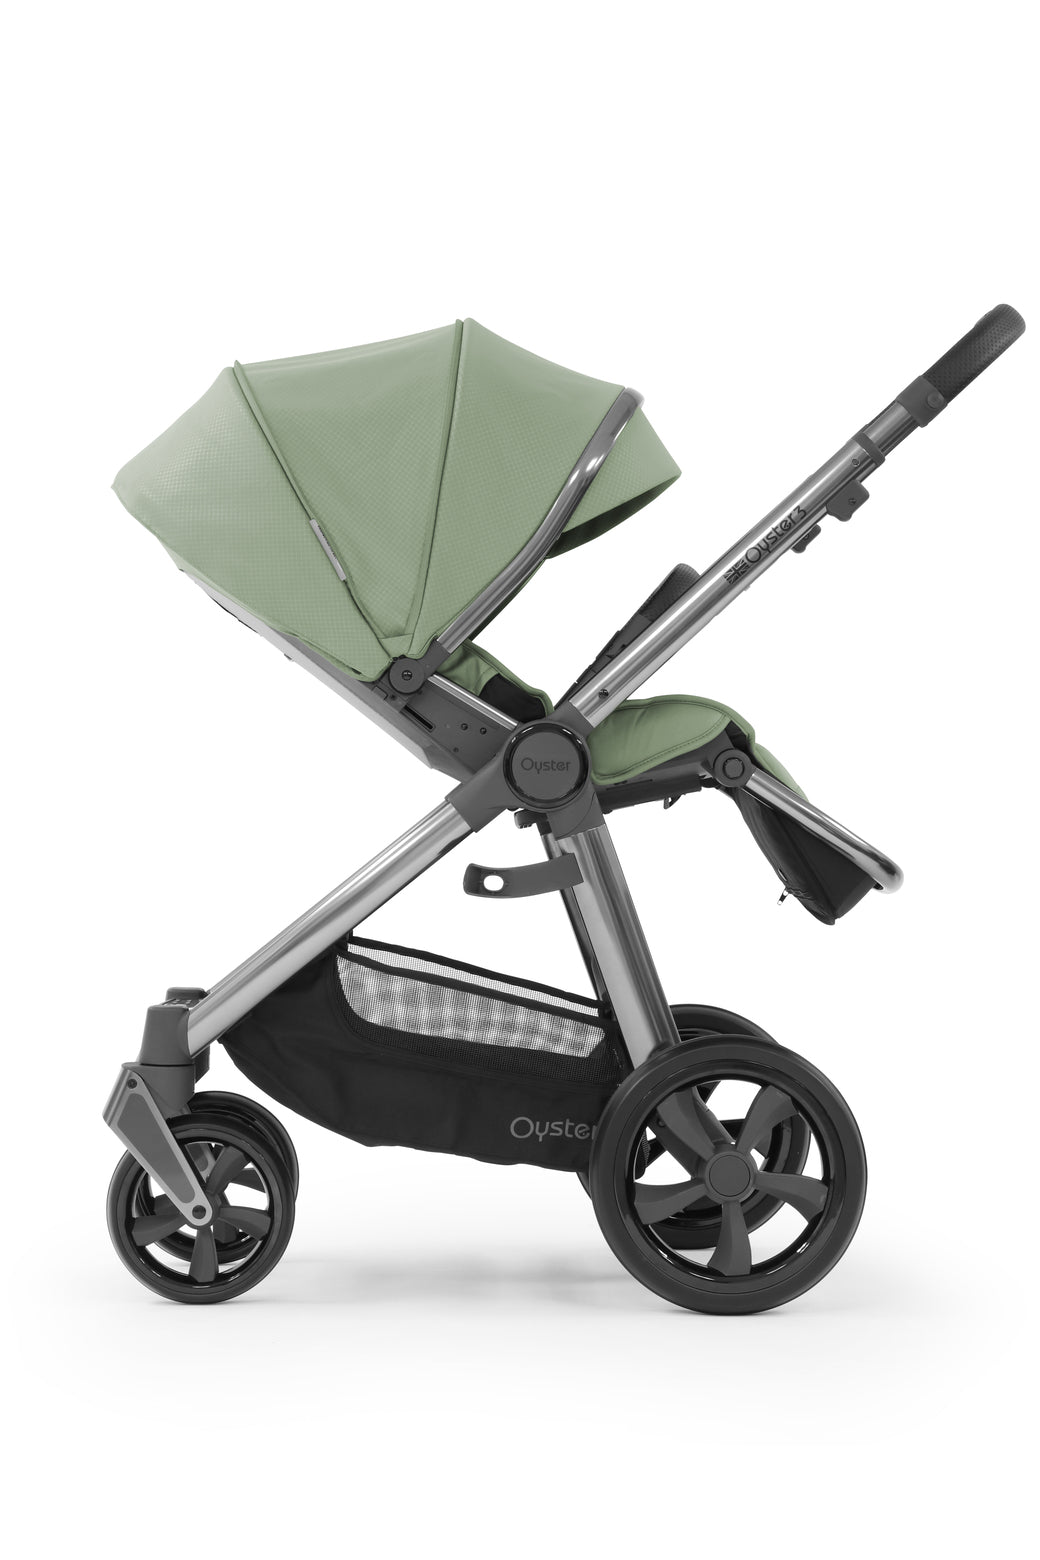 Babystyle Oyster 3 Essential 5 Piece Travel System Bundle With Pebble 360 - Spearmint - For Your Little One